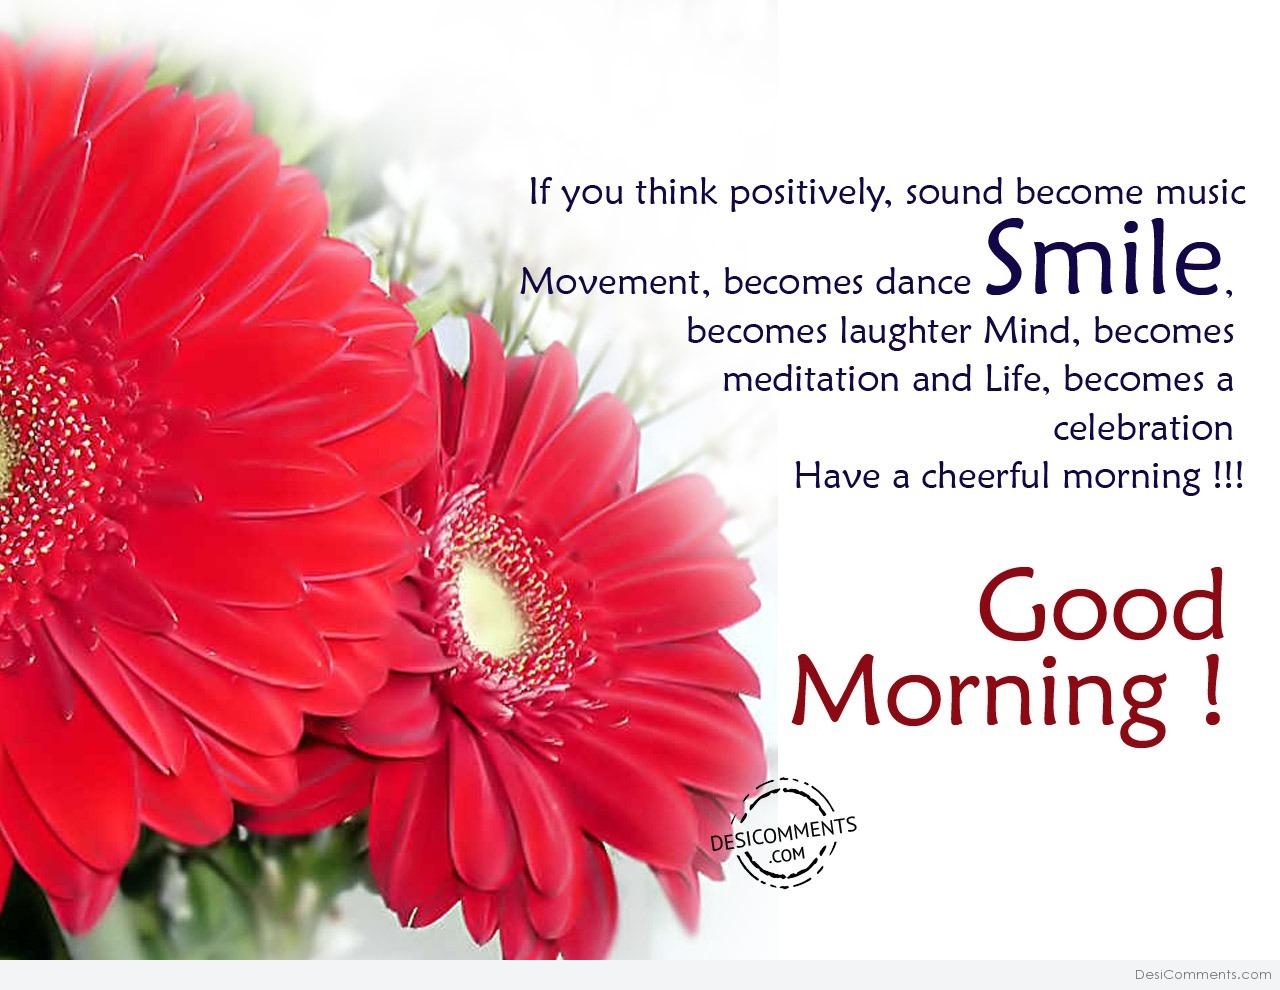 Have A Cheerful Morning – Good Morning - DesiComments.com